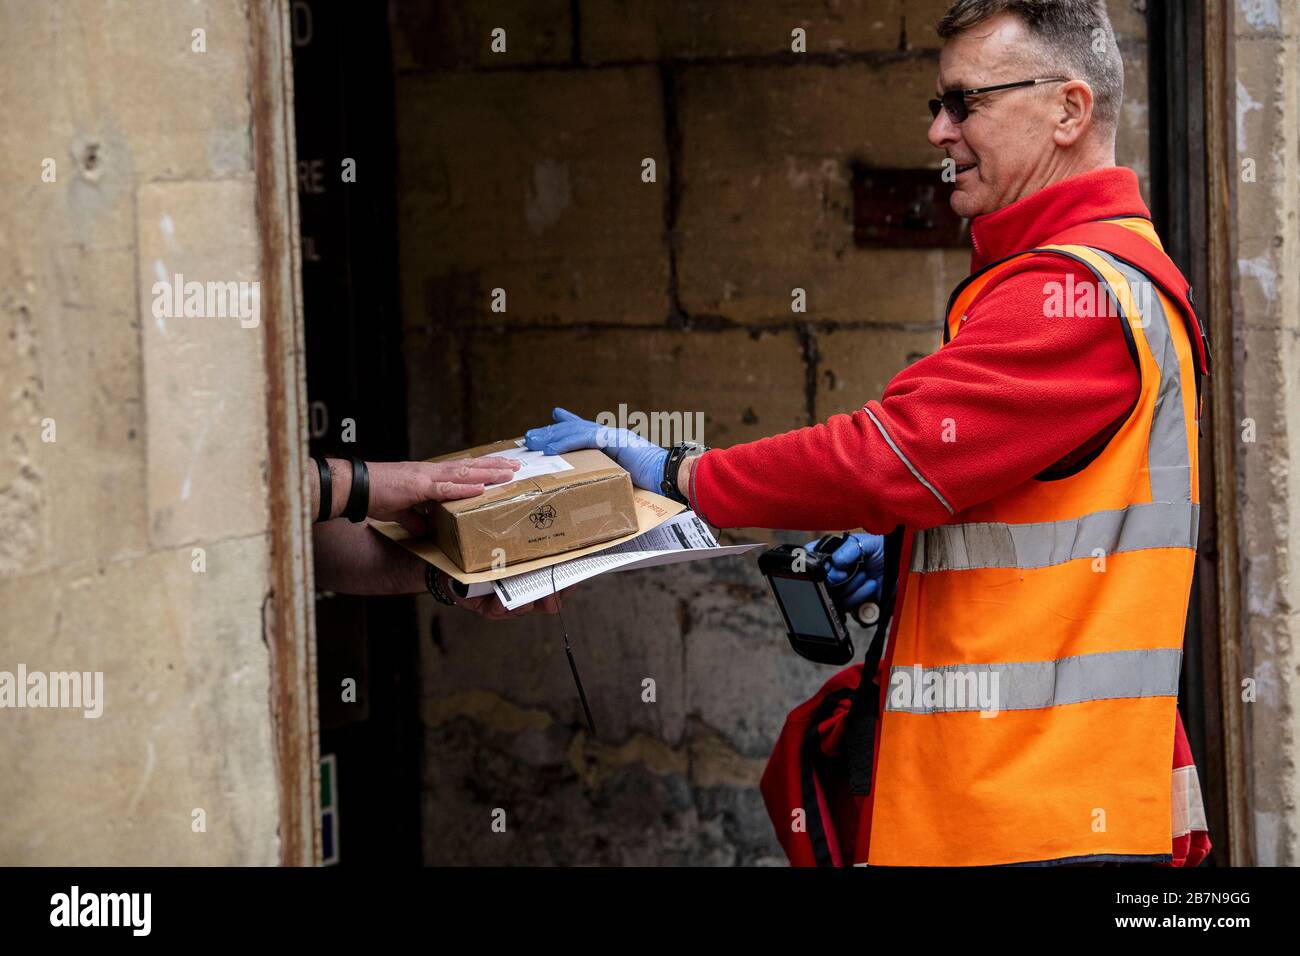 A Royal Mail postman makes deliveries wearing rubber gloves in Bath, Somerset, after the government announced stricter measures to combat Coronavirus. Stock Photo